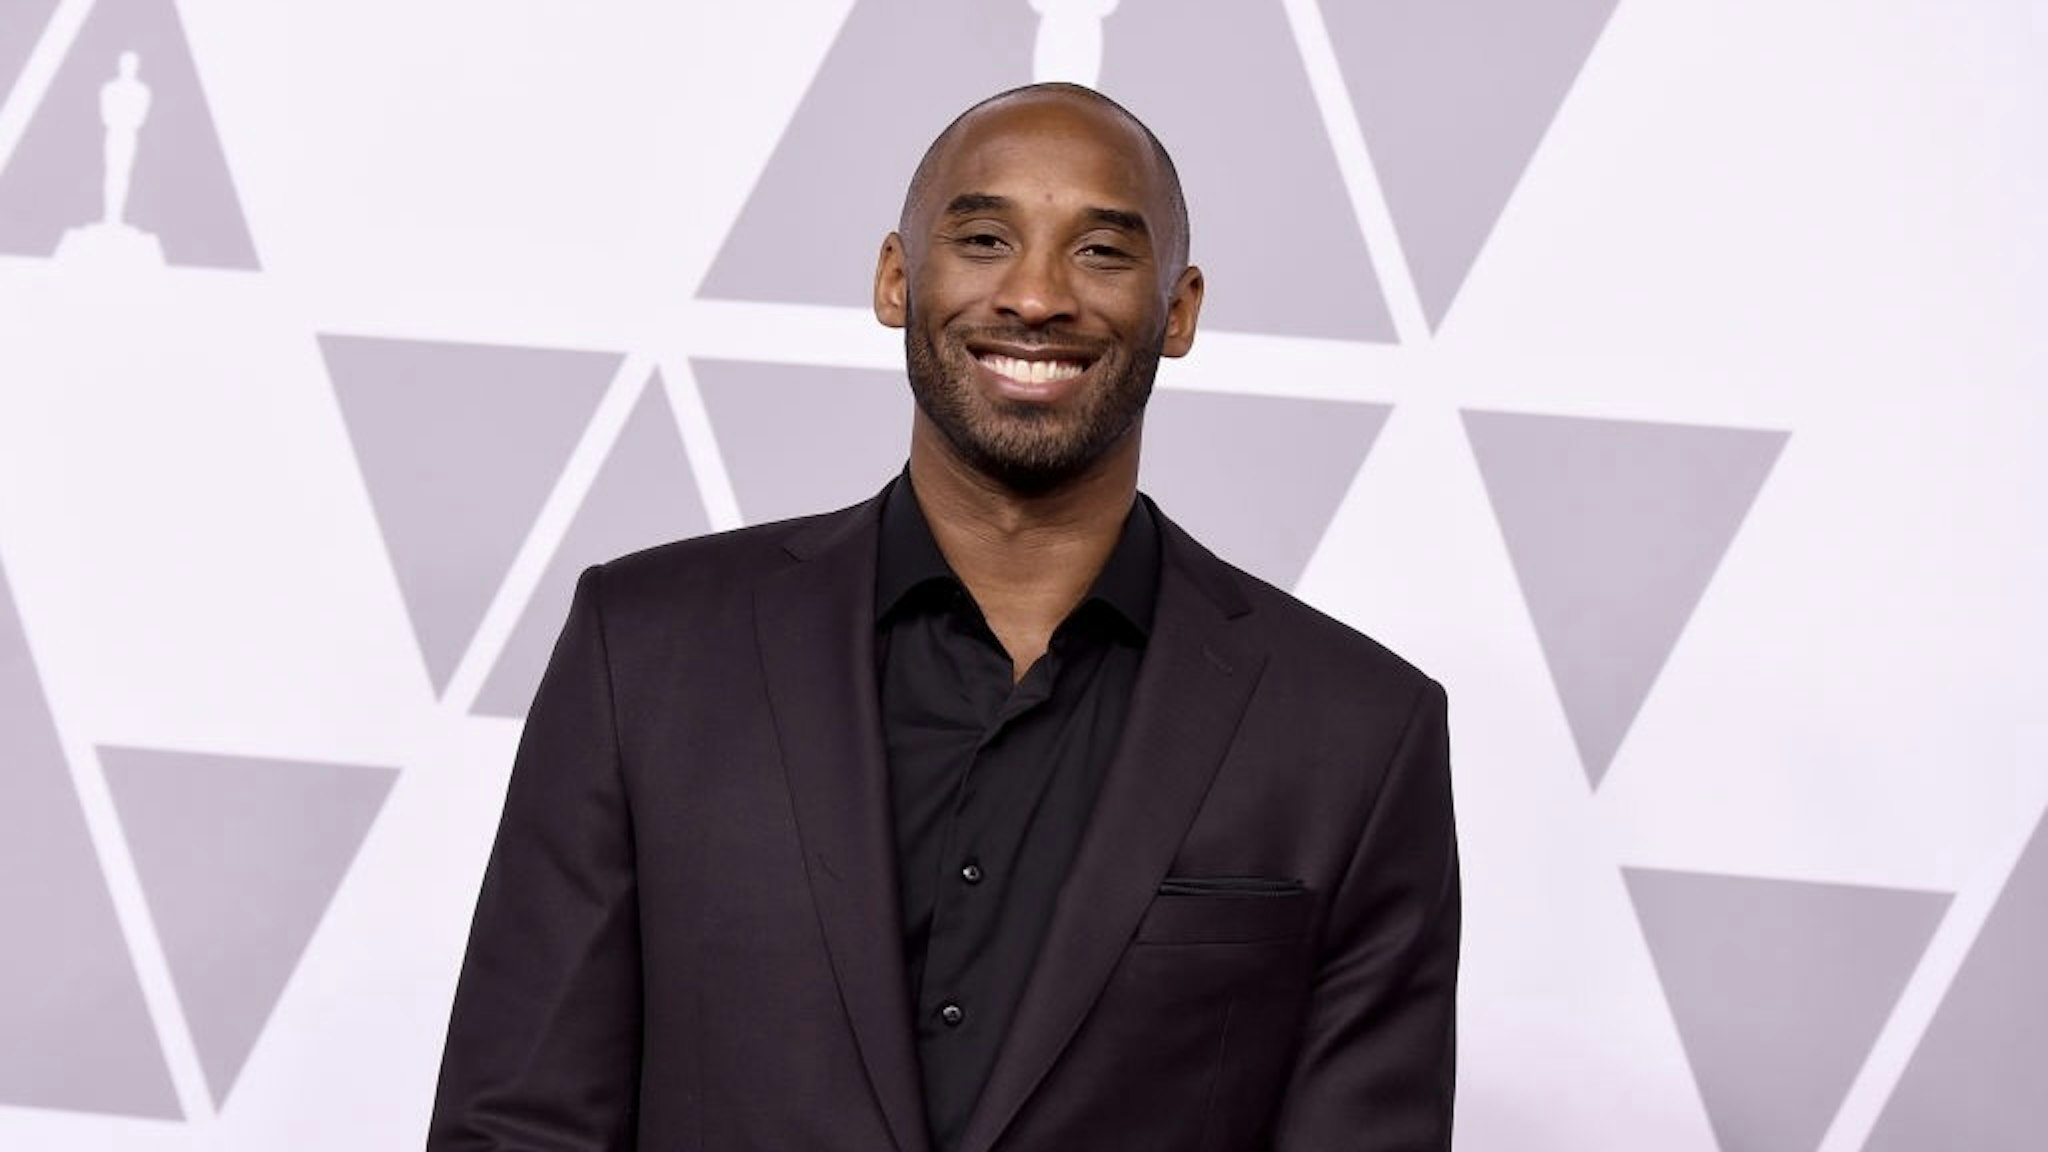 90th Annual Academy Awards Nominee Luncheon - Arrivals BEVERLY HILLS, CA - FEBRUARY 05: Kobe Bryant attends the 90th Annual Academy Awards Nominee Luncheon at The Beverly Hilton Hotel on February 5, 2018 in Beverly Hills, California. (Photo by Kevin Winter/Getty Images)